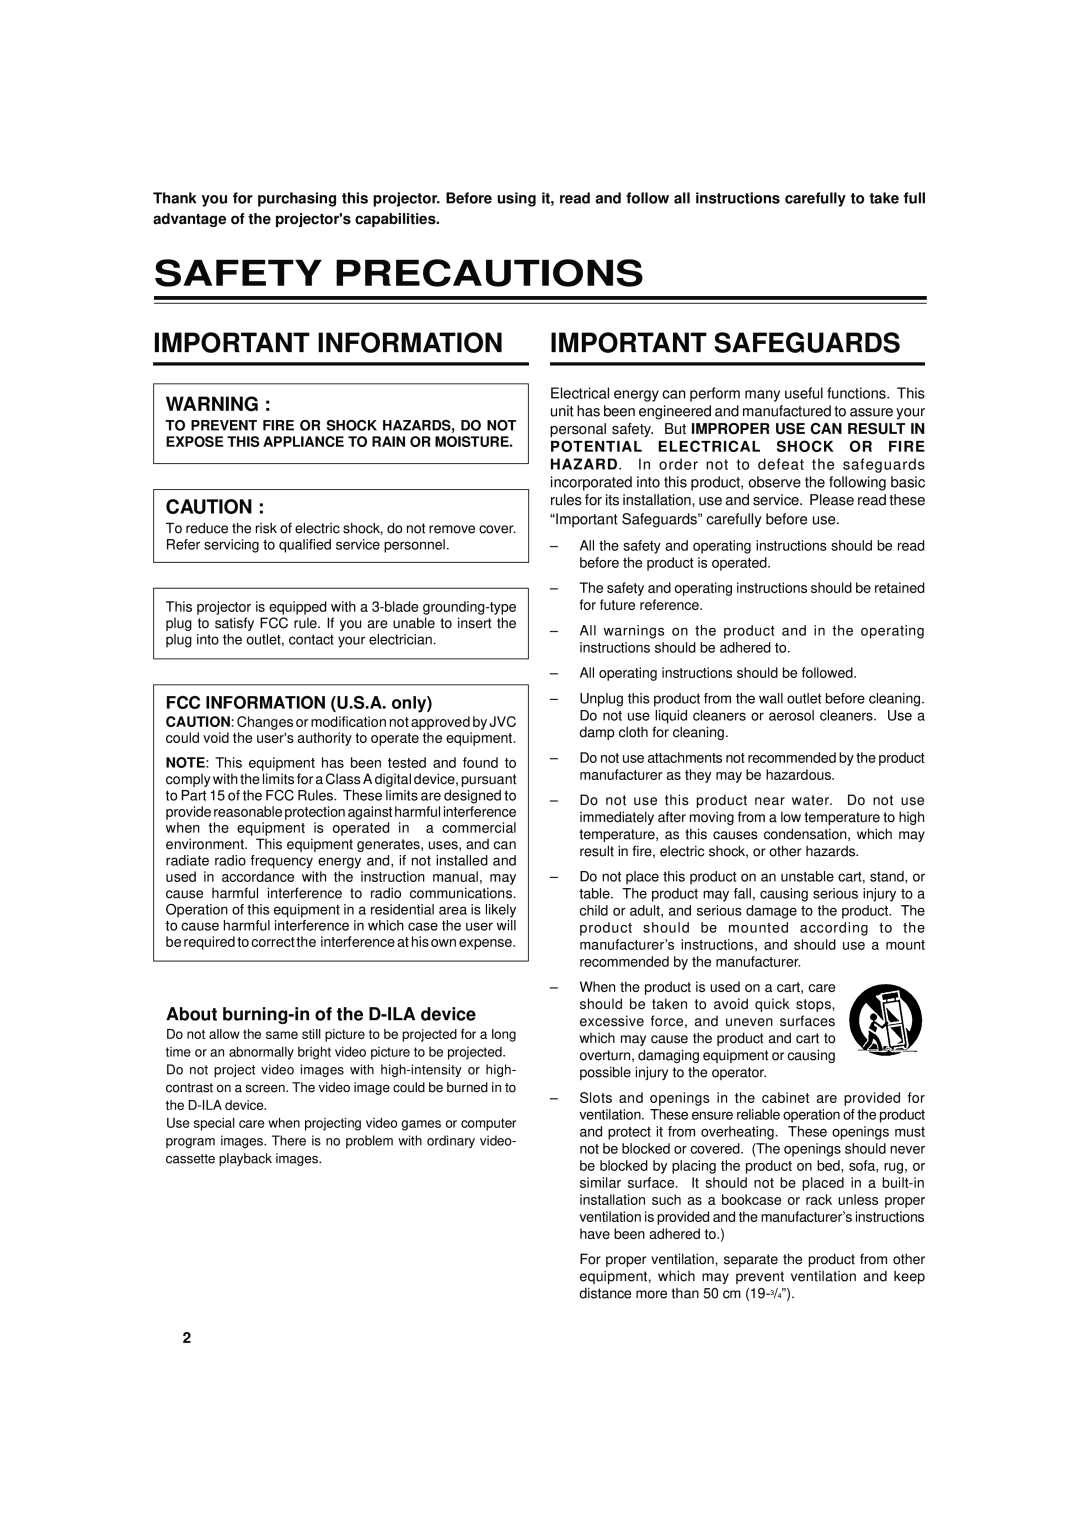 JVC DLA-S15U manual Safety Precautions, Important Information Important Safeguards, About burning-in of the D-ILA device 